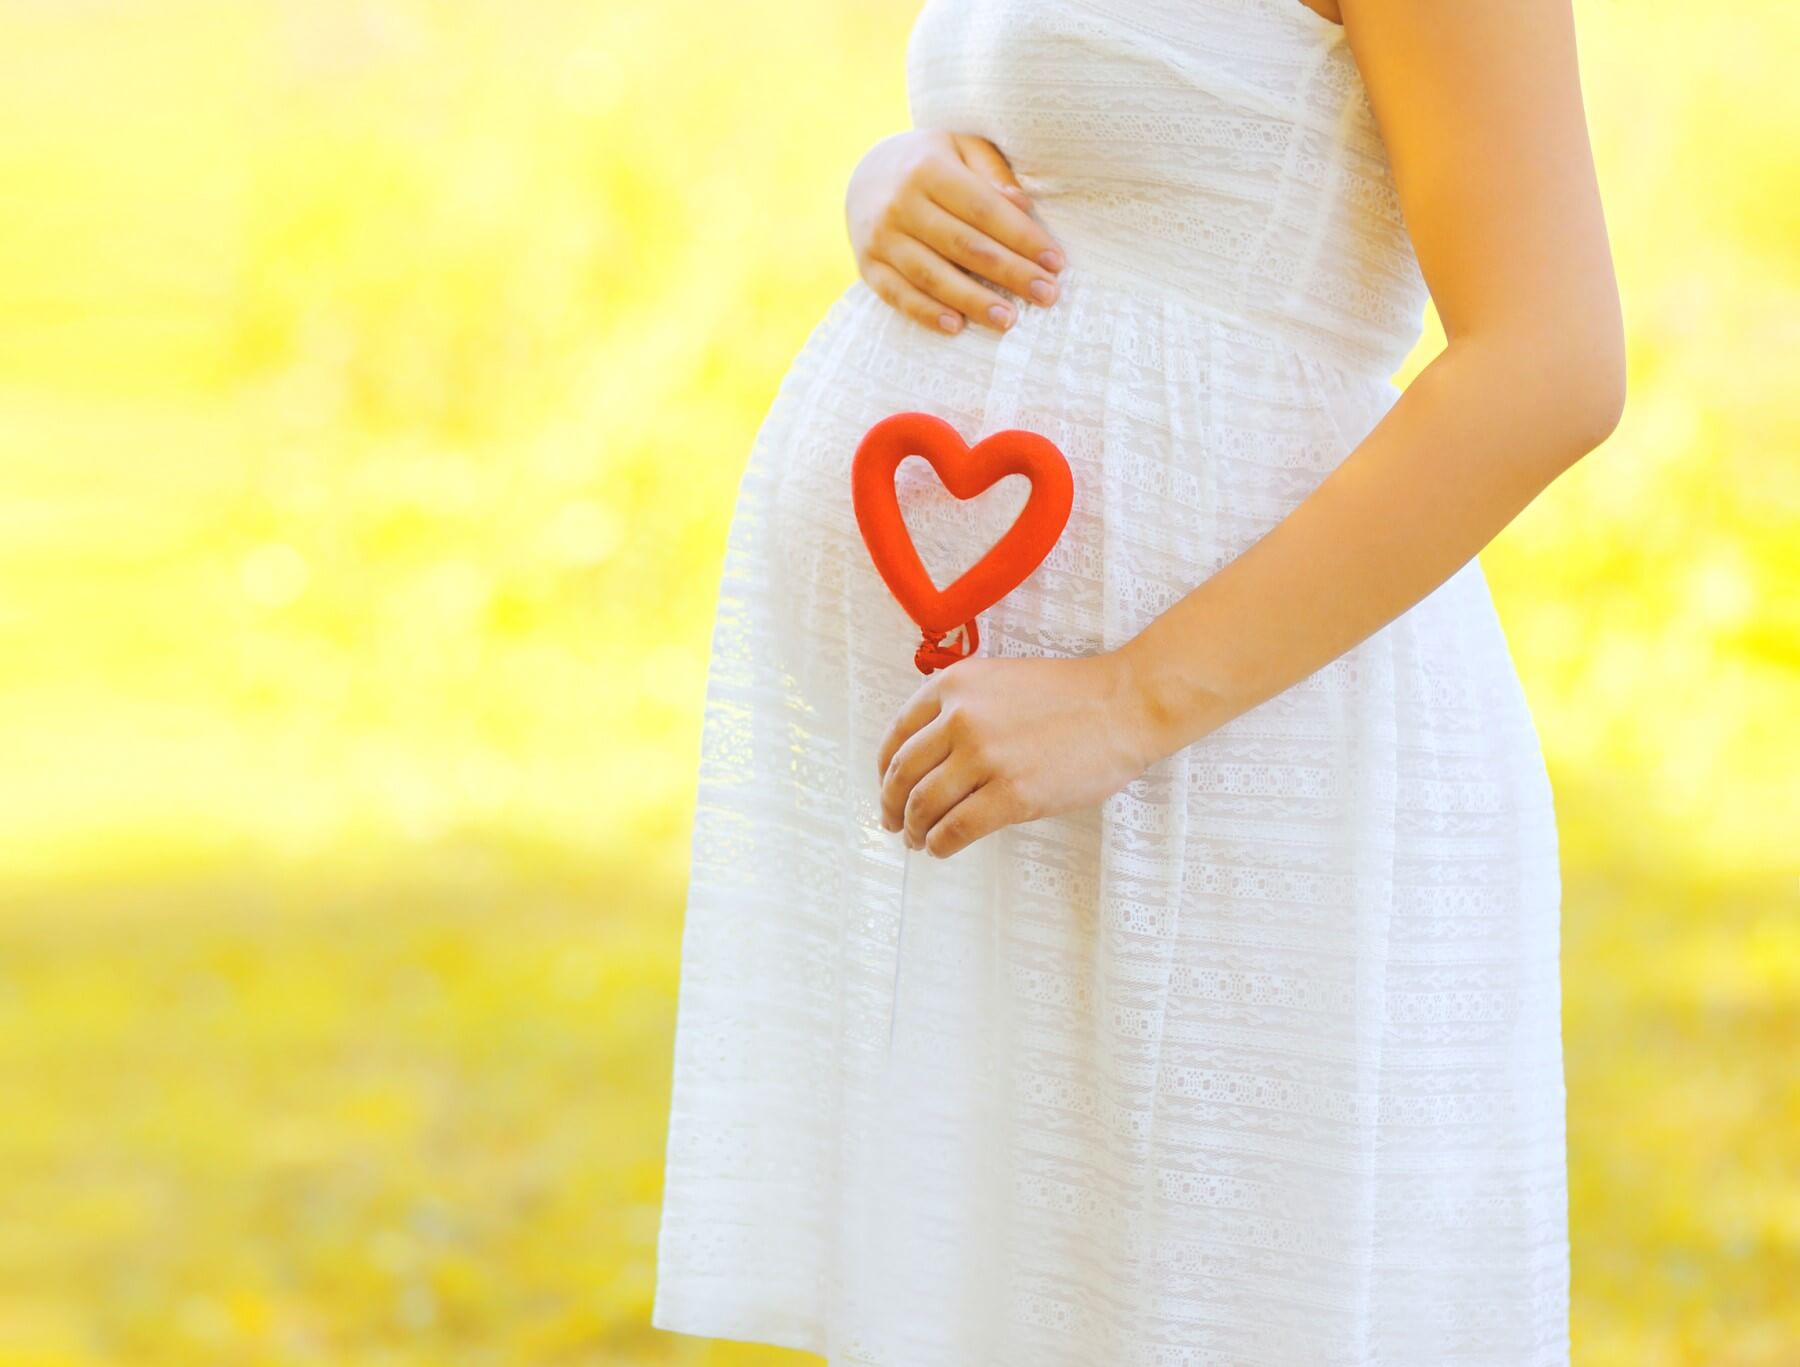 Pregnant woman wearing a white dress has her right hand on her belly and her left hand holding a red heart decoration.